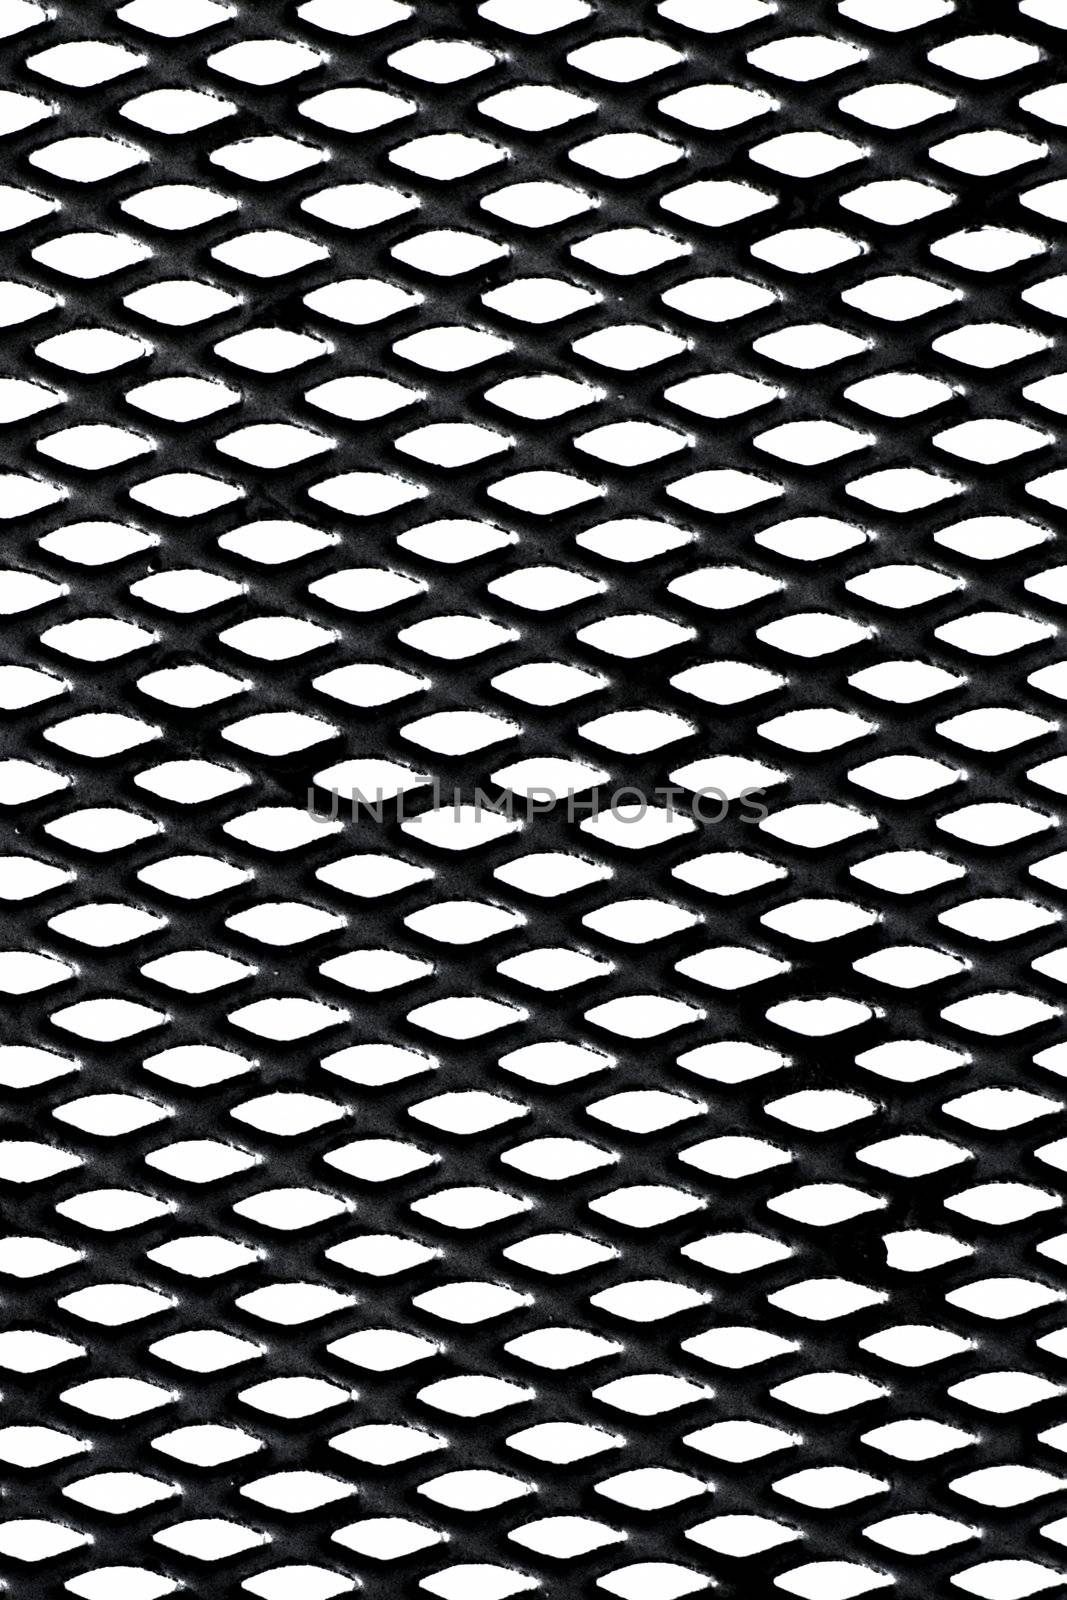 Metal grid over white background by pulen